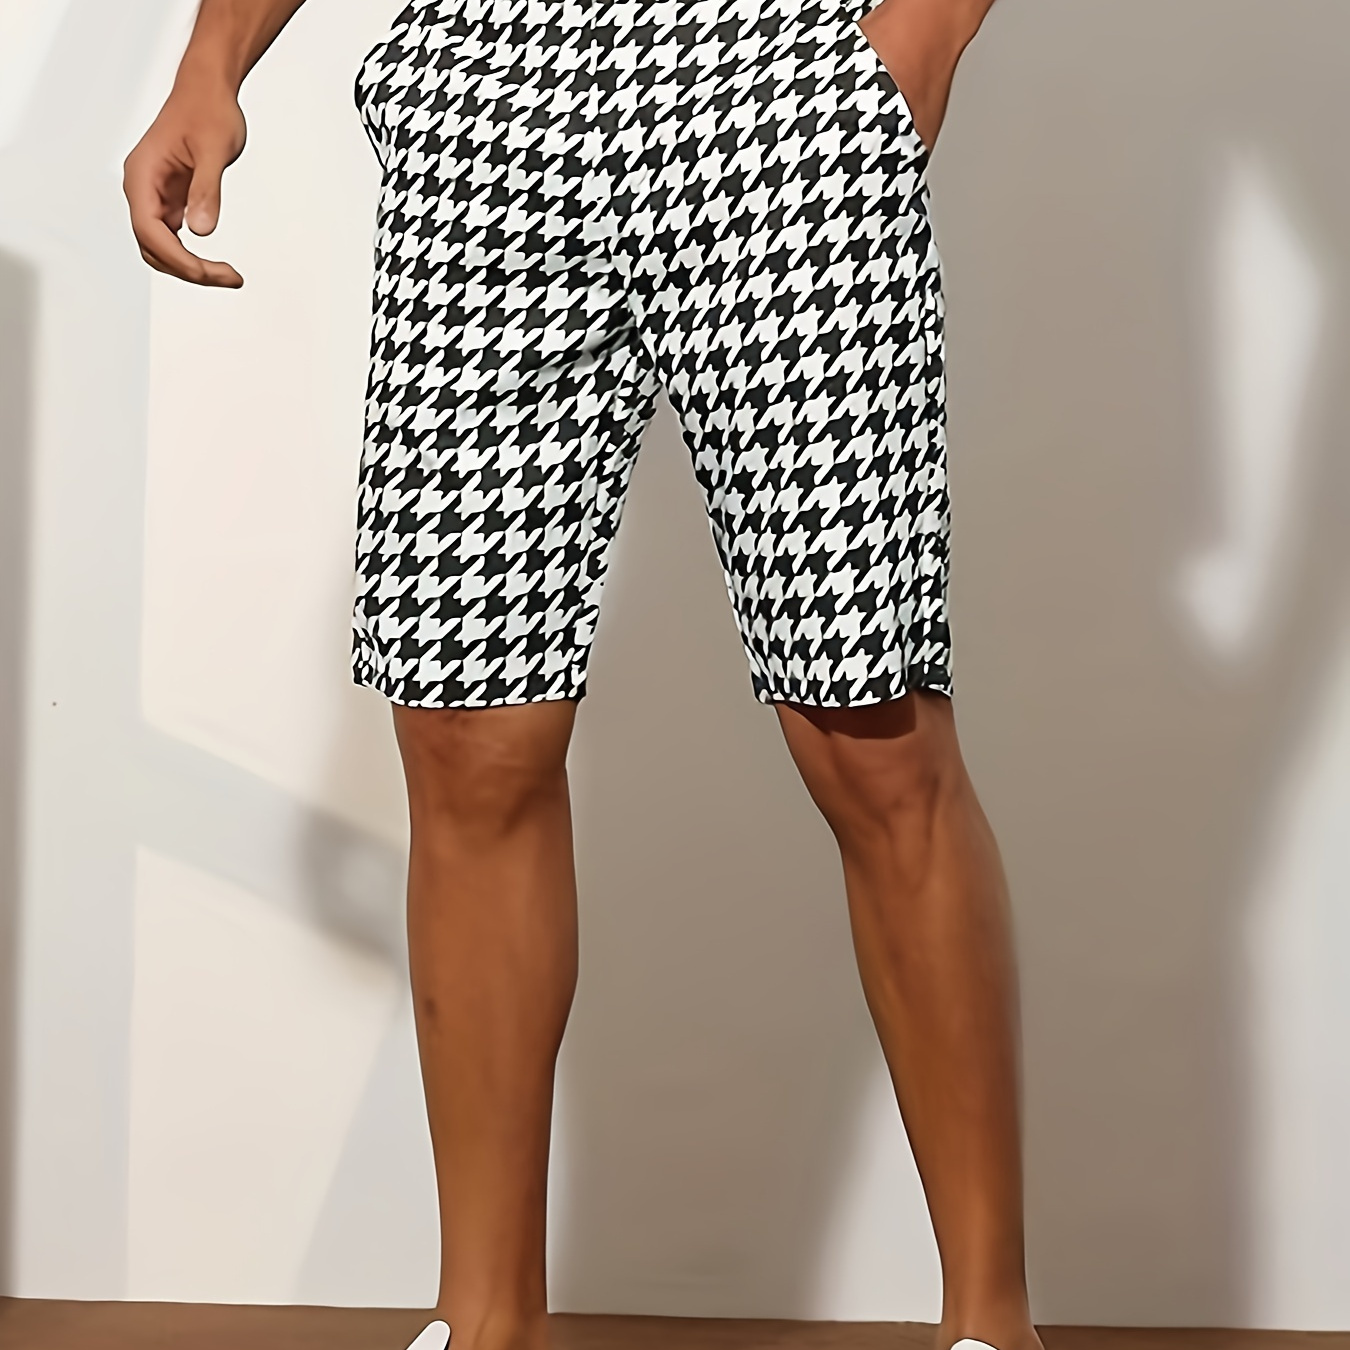 

Men's Houndstooth Graphic Print Shorts With Pockets, Casual Shorts For Summer